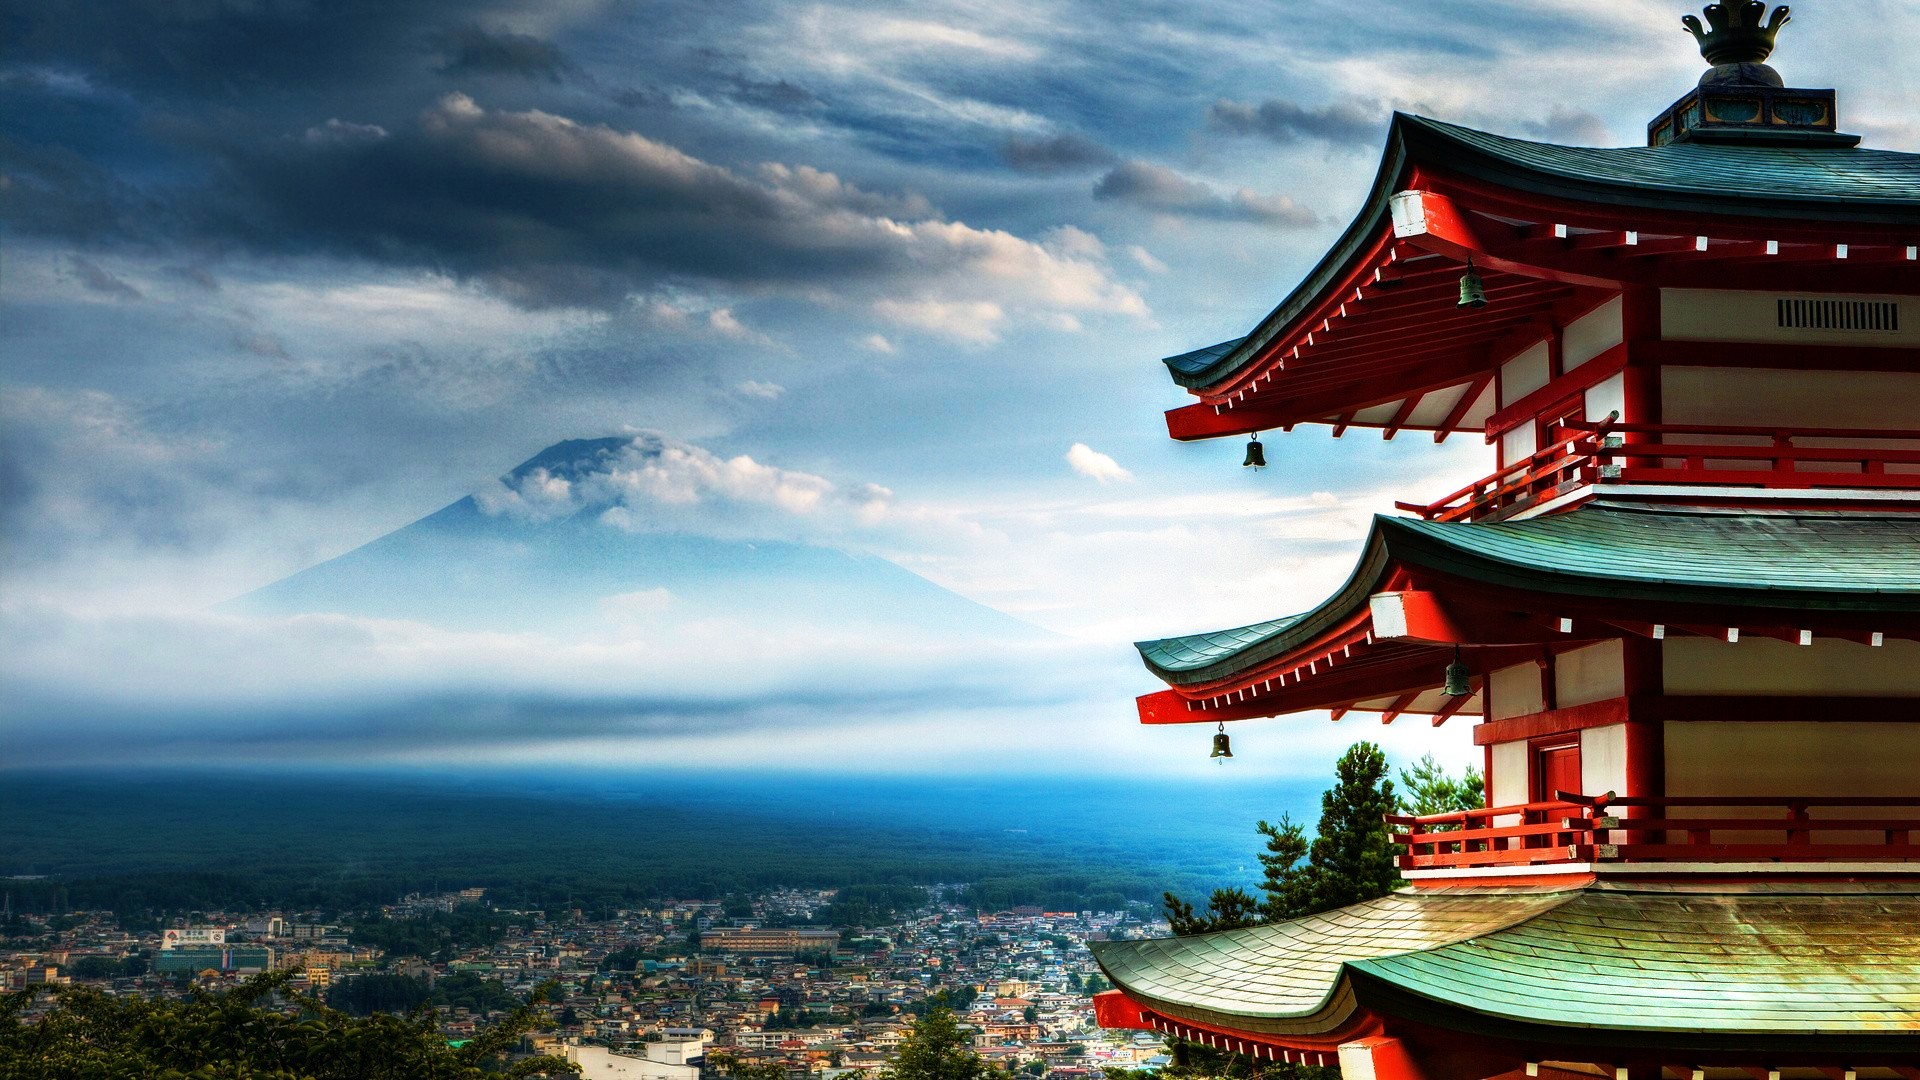 japan wallpaper 1920x chinese architecture, sky, japanese architecture, pagoda, cloud